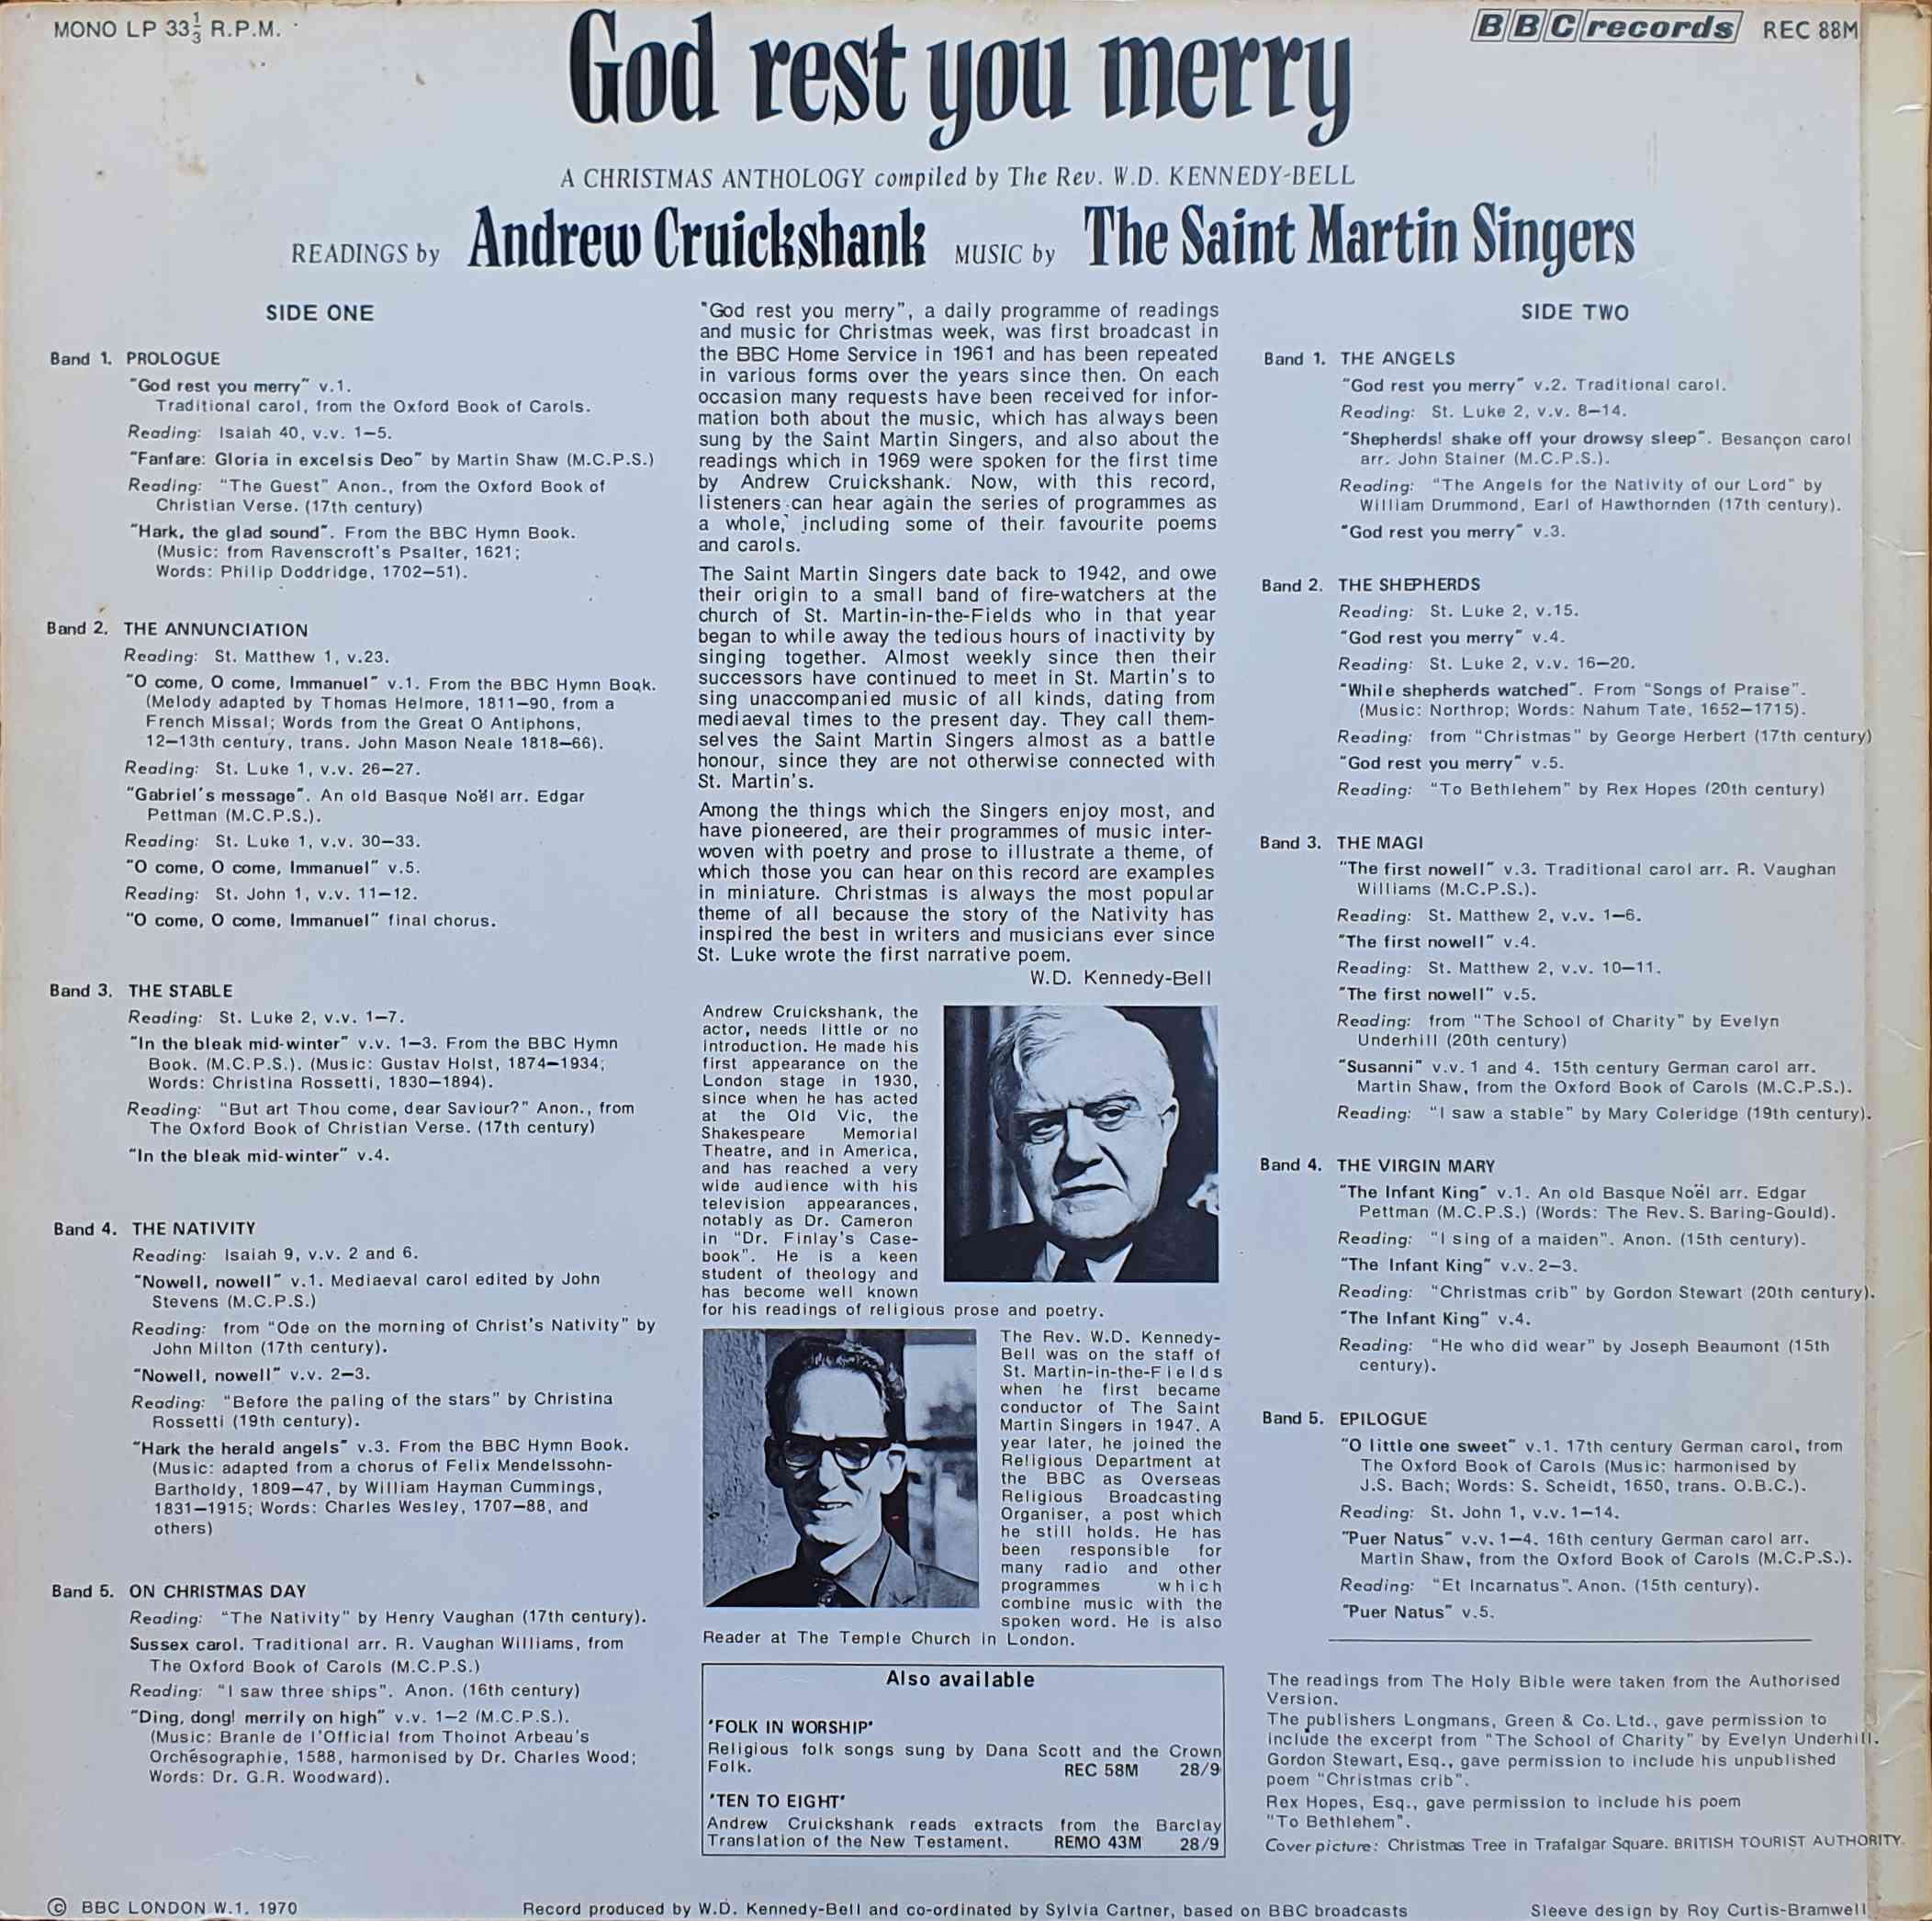 Picture of REC 88 God rest you merry by artist Andrew Cruickshank / The Saint Martin Singers from the BBC records and Tapes library